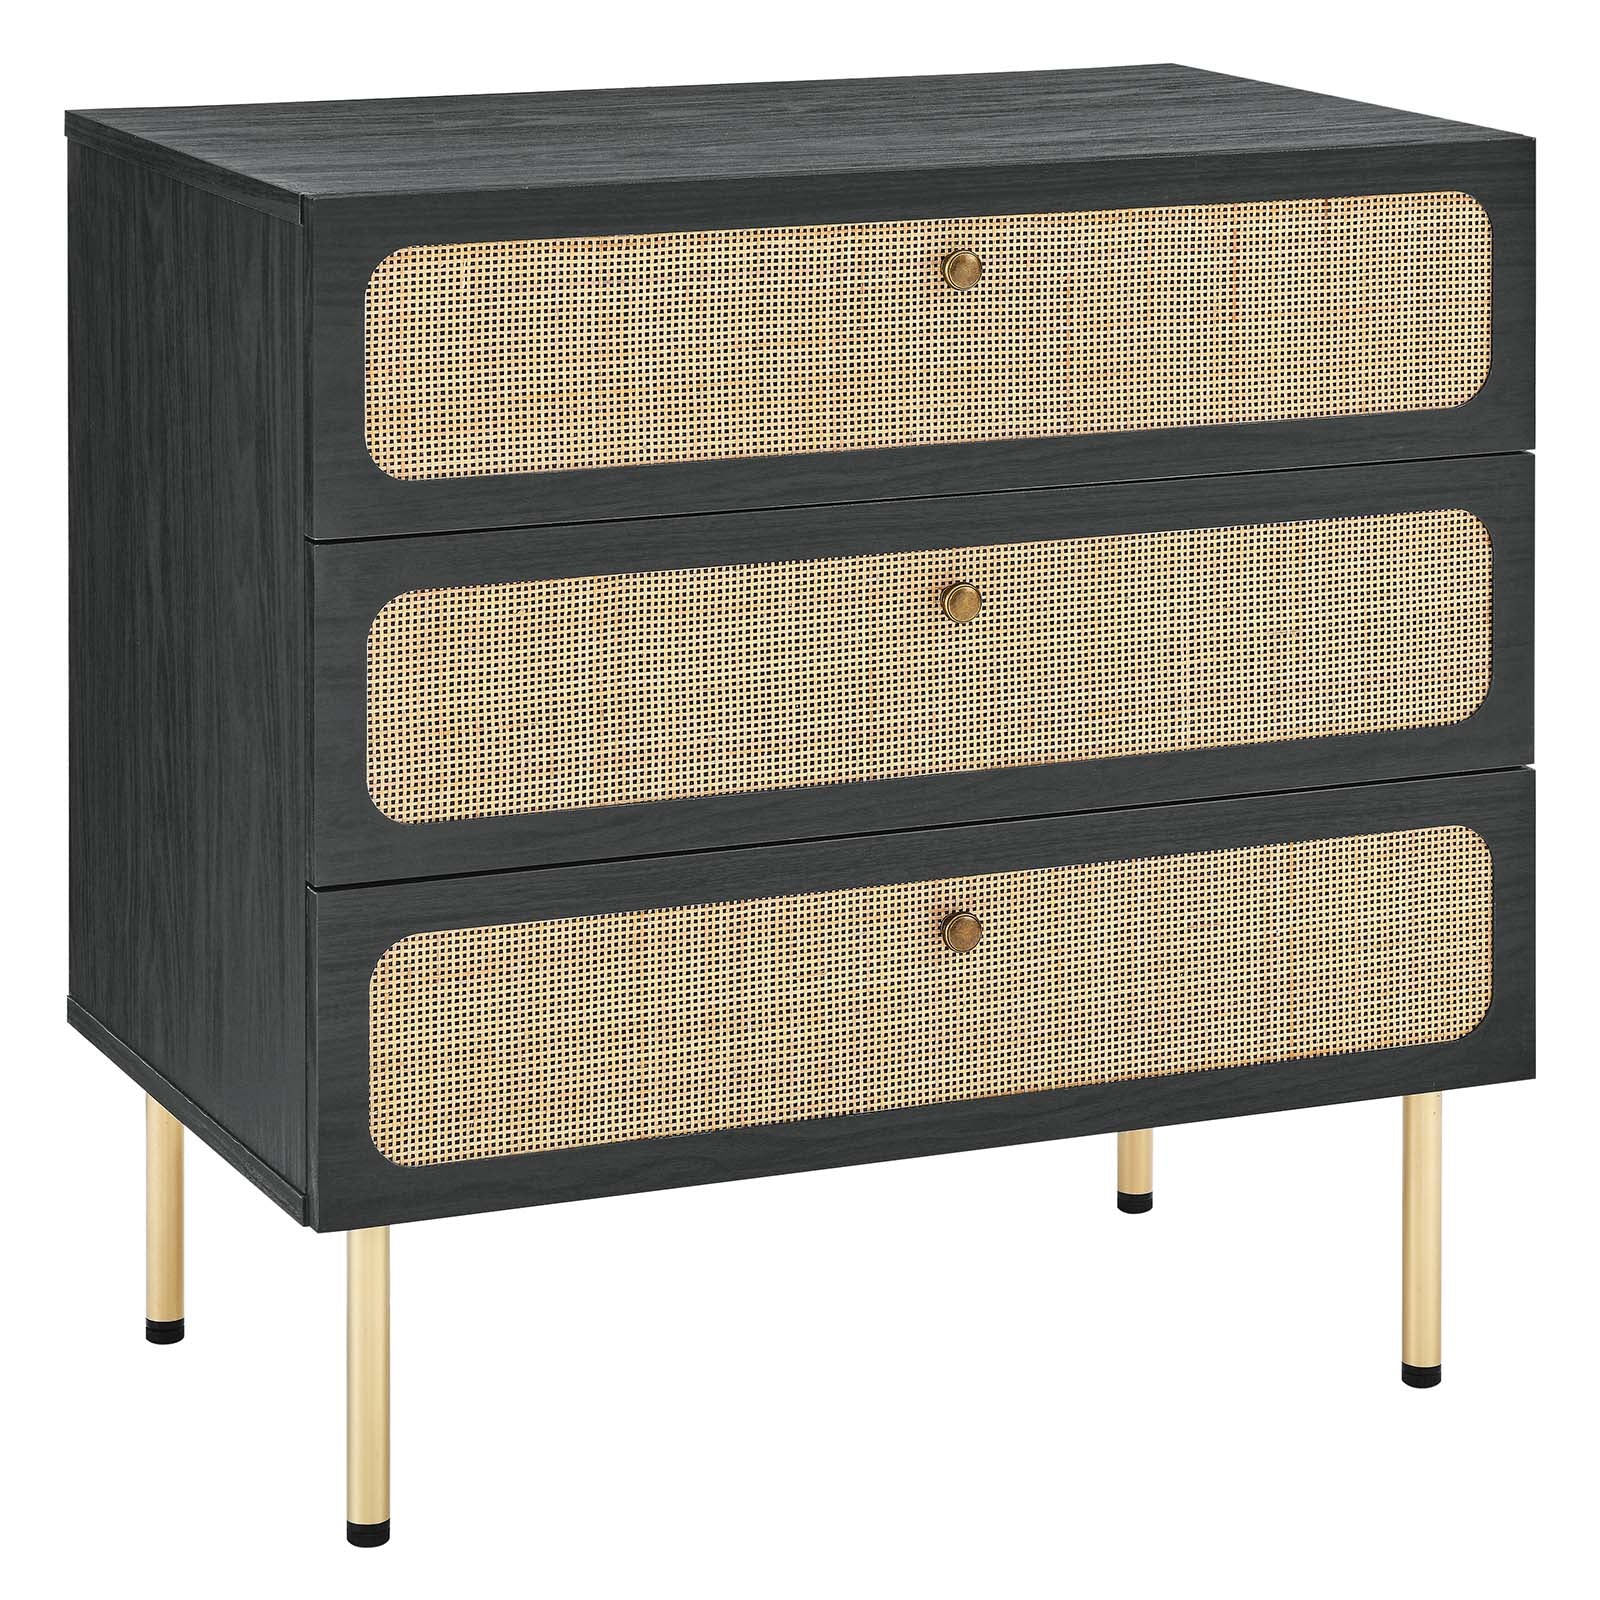 Chaucer 3-Drawer Chest - East Shore Modern Home Furnishings